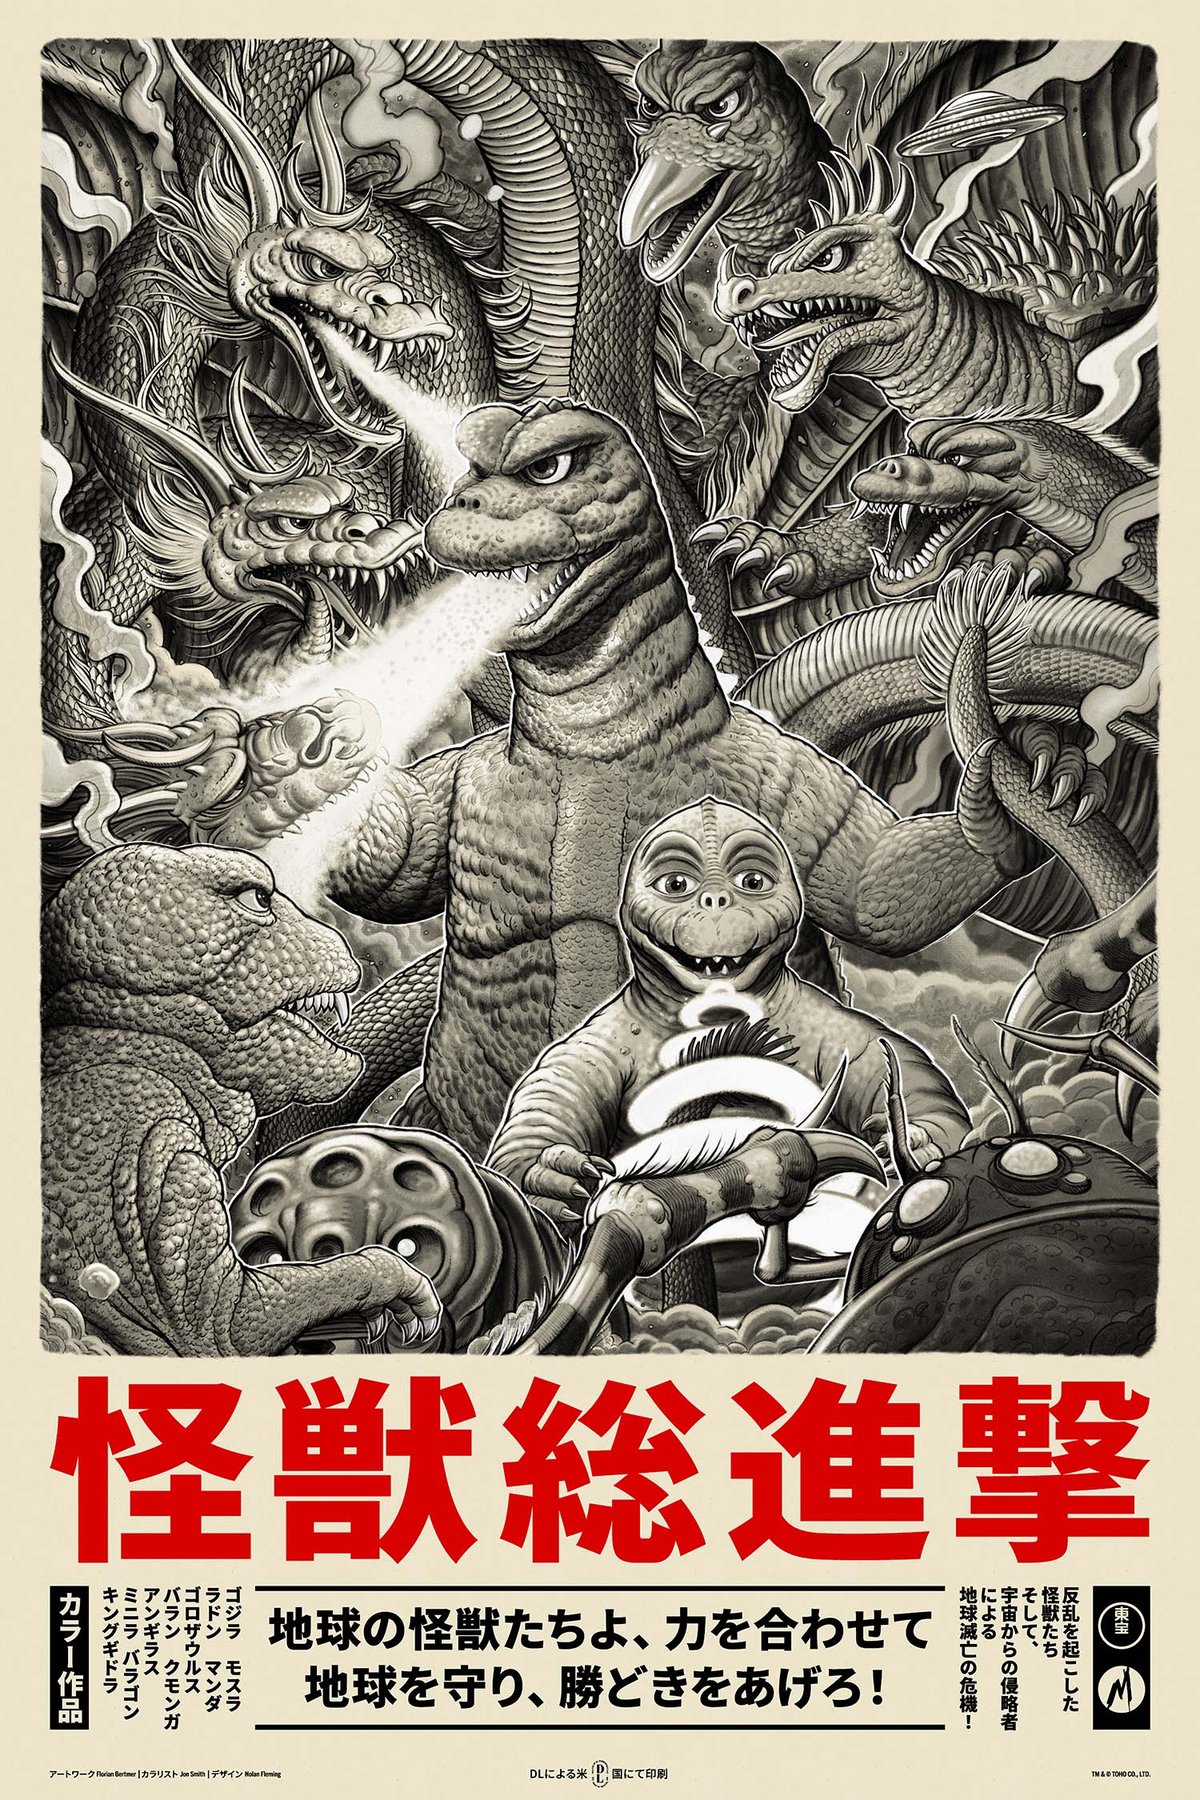 Image of "Destroy all Monsters" Variant artist Edition Remarqued